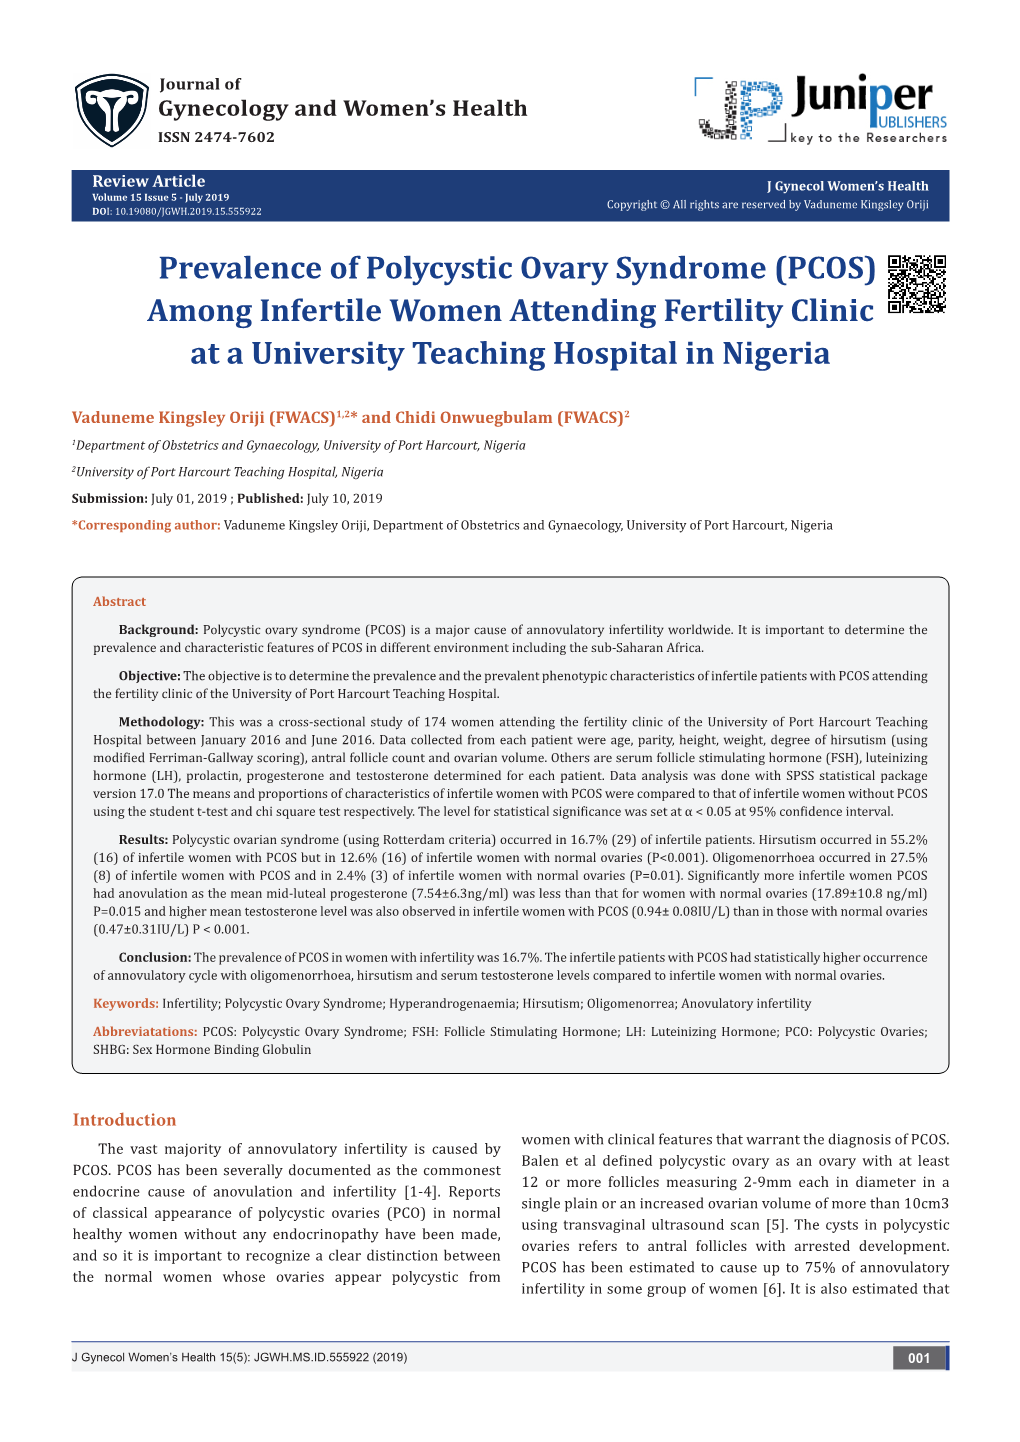 Prevalence of Polycystic Ovary Syndrome (PCOS) Among Infertile Women Attending Fertility Clinic at a University Teaching Hospital in Nigeria